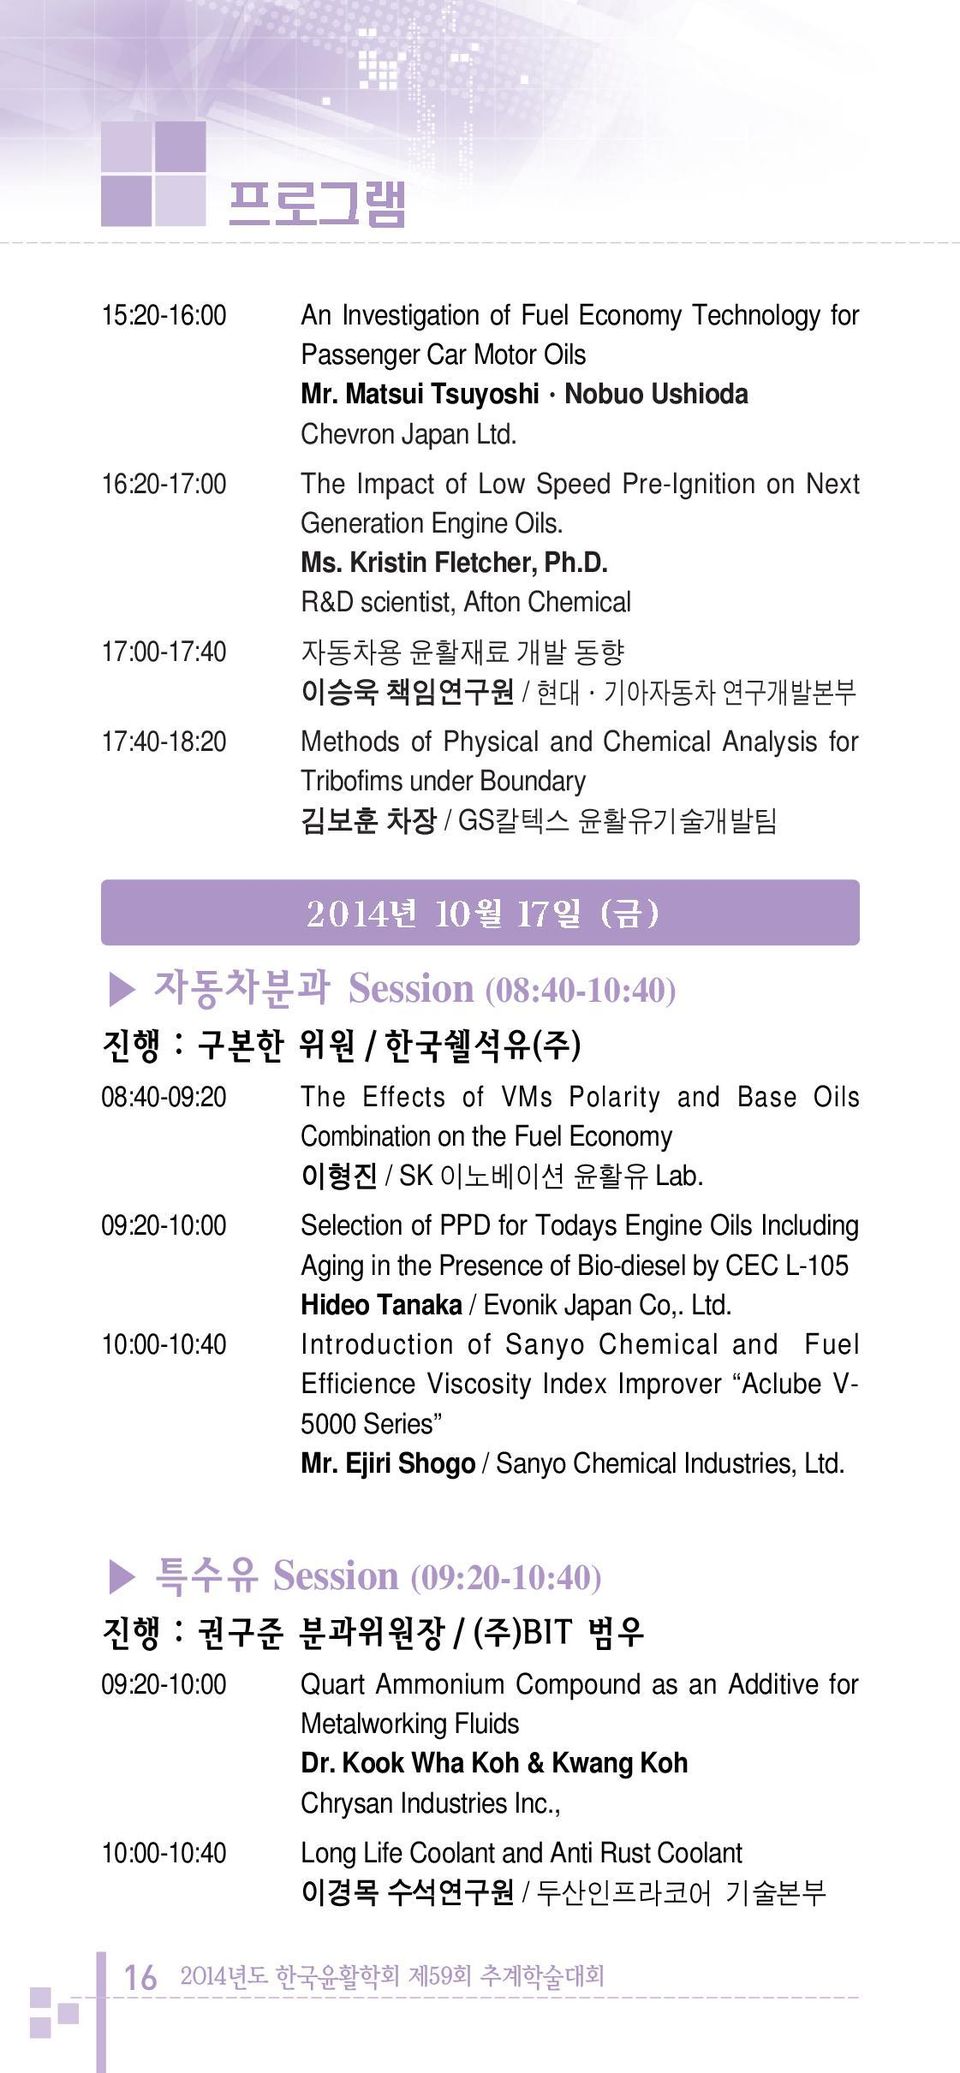 R&D scientist, Afton Chemical 17:00-17:40 / 17:40-18:20 Methods of Physical and Chemical Analysis for Tribofims under Boundary / GS Session (08:40-10:40) 08:40-09:20 The Effects of VMs Polarity and